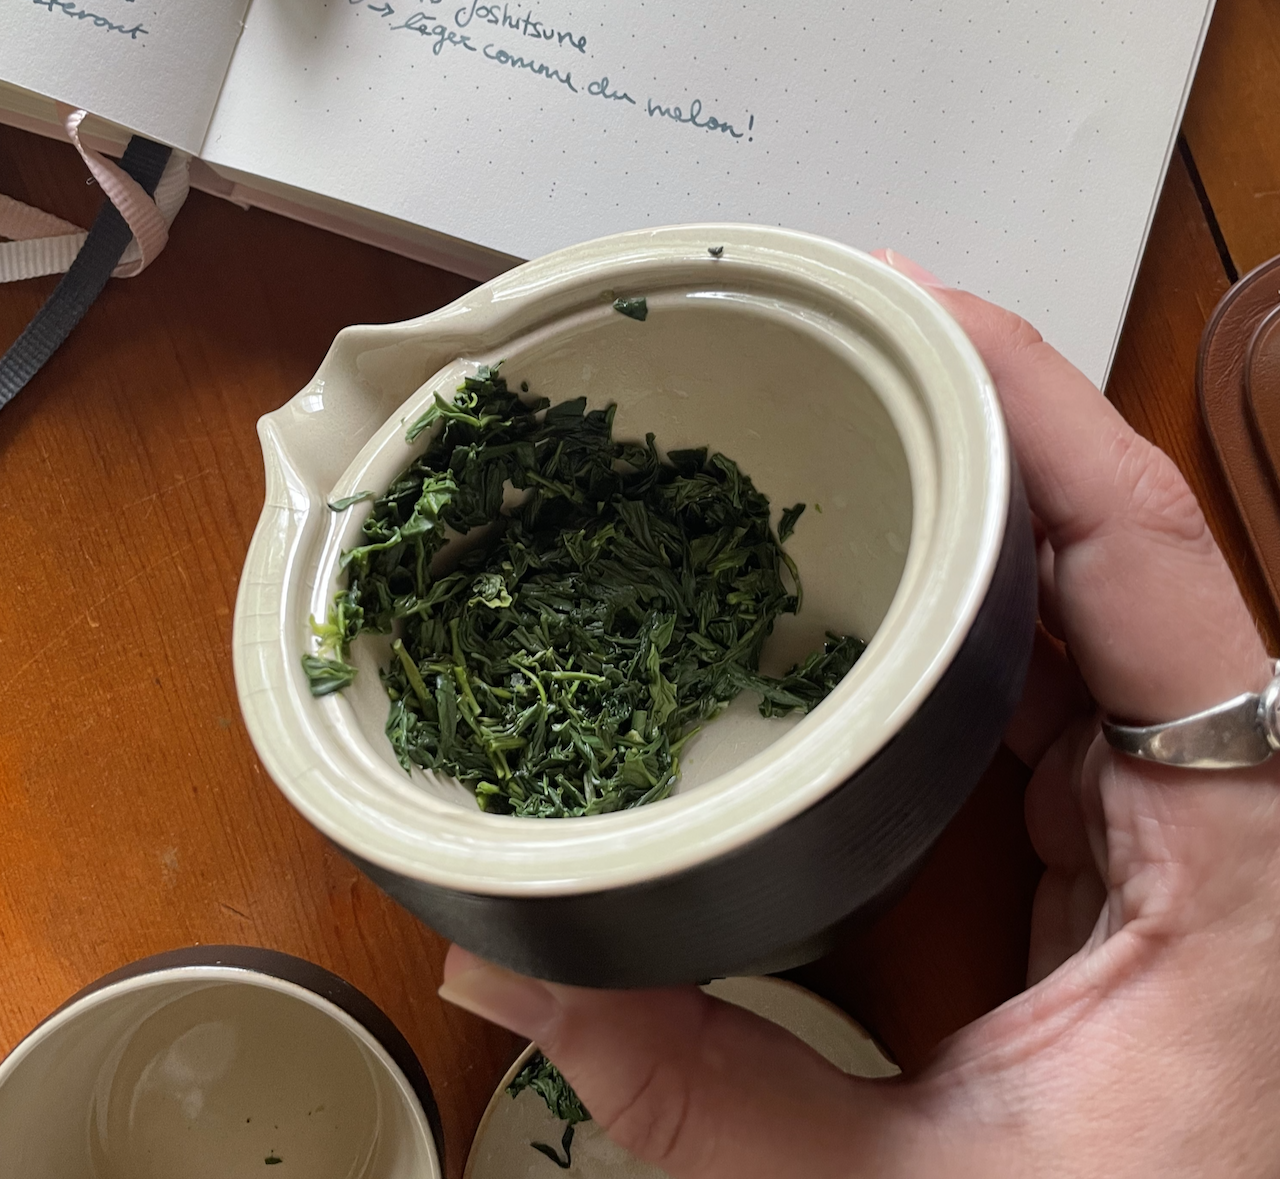 The inside of a travail gaiwan which has the bright green leaves of gyokuro after the first or second infusion.